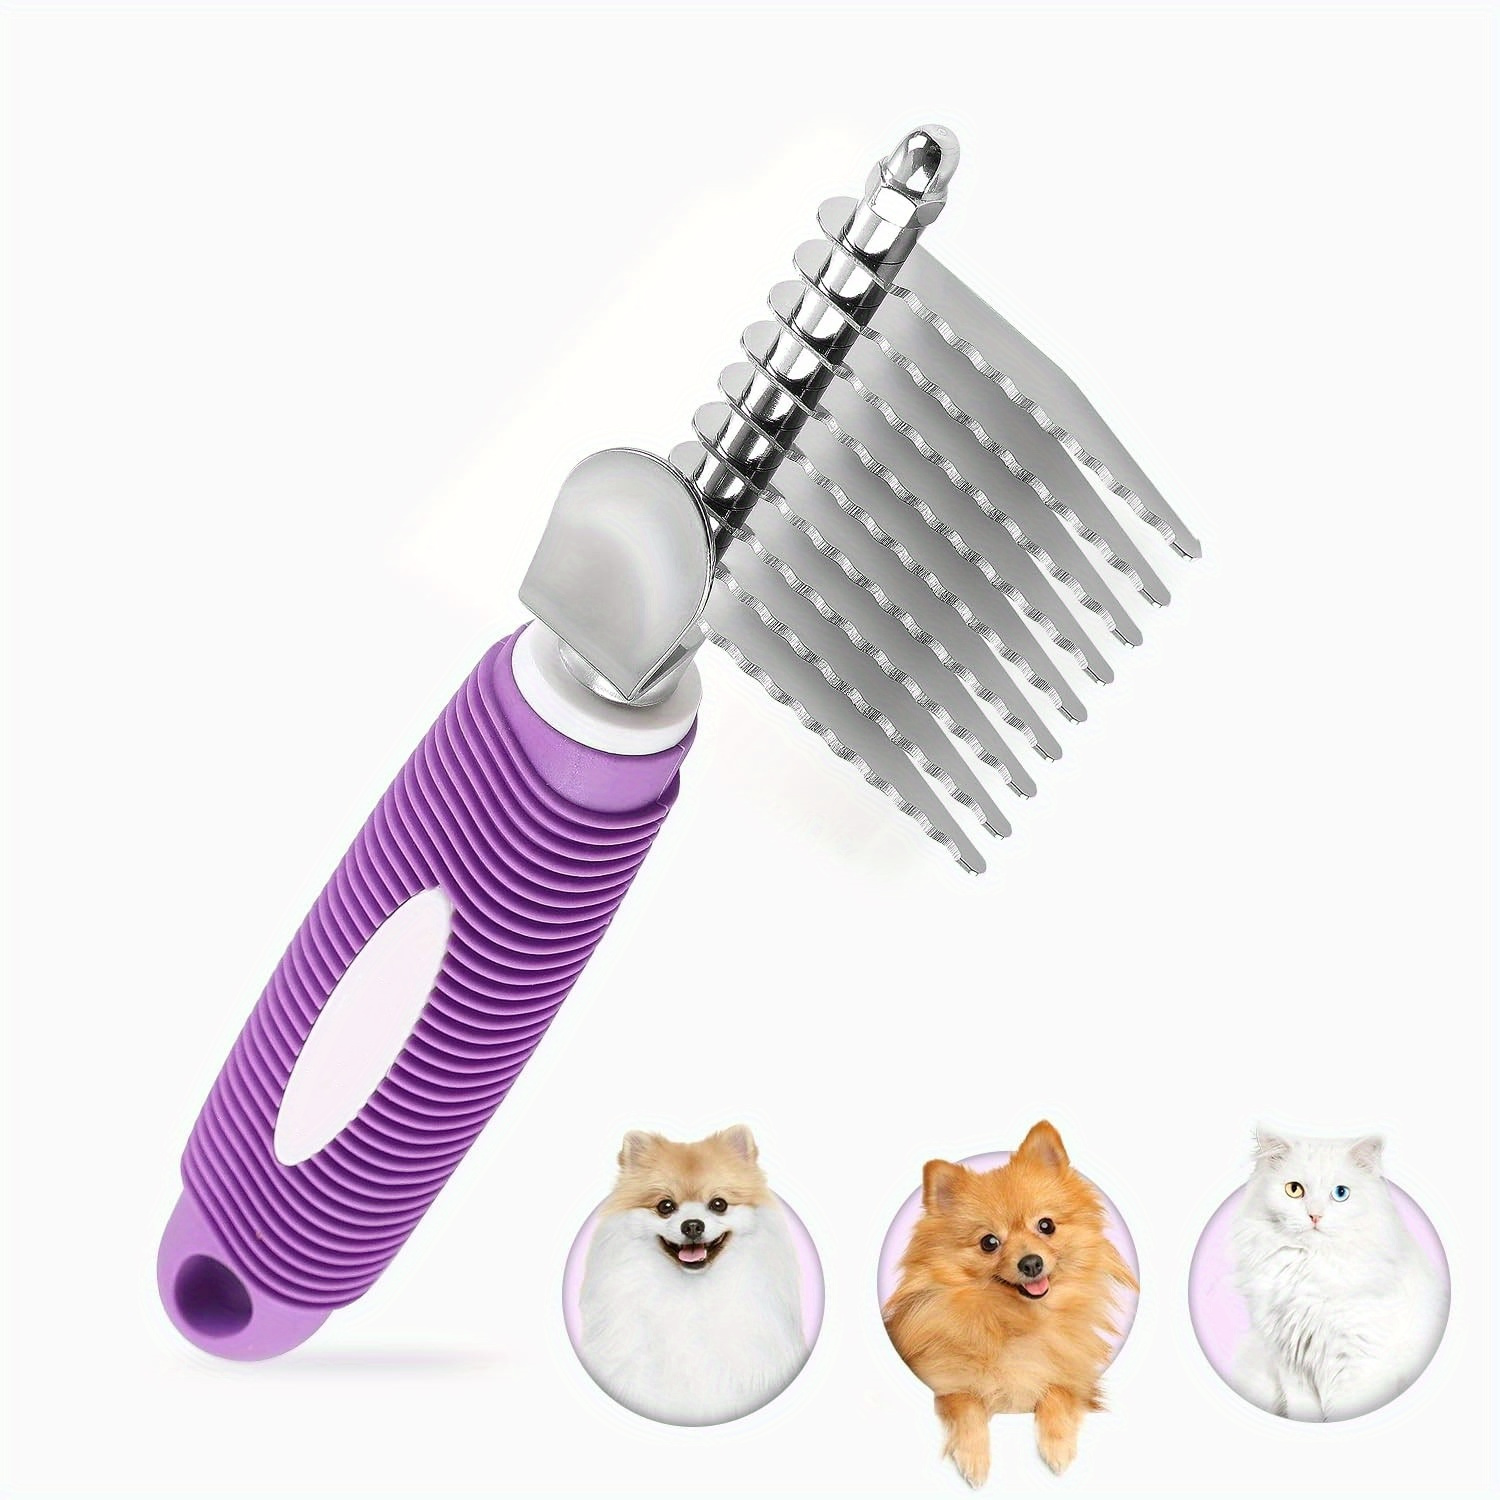 

1pc Dematting Fur Rake Comb Brush Tool For Dogs & Cats With Extra Long Stainless Steel Safety Blades For Removing Knots, Mats & Tangles - Pet Grooming Deshedding Brush Tool With Anti-slip Grip